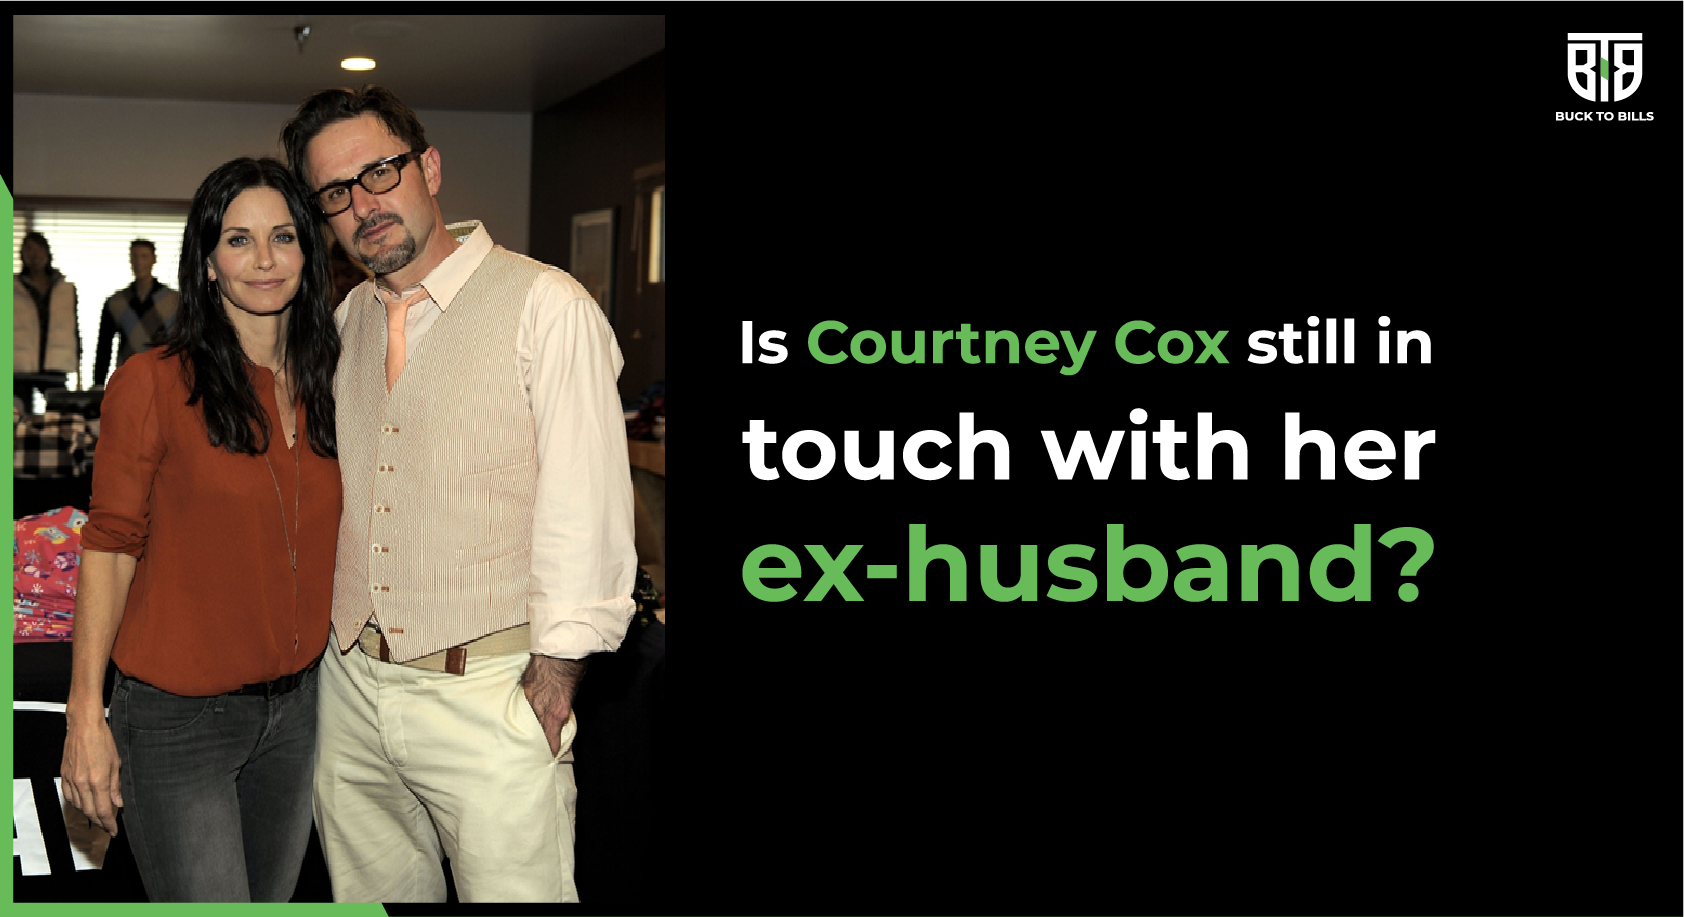 Is Courtney Cox still in touch with her ex-husband?